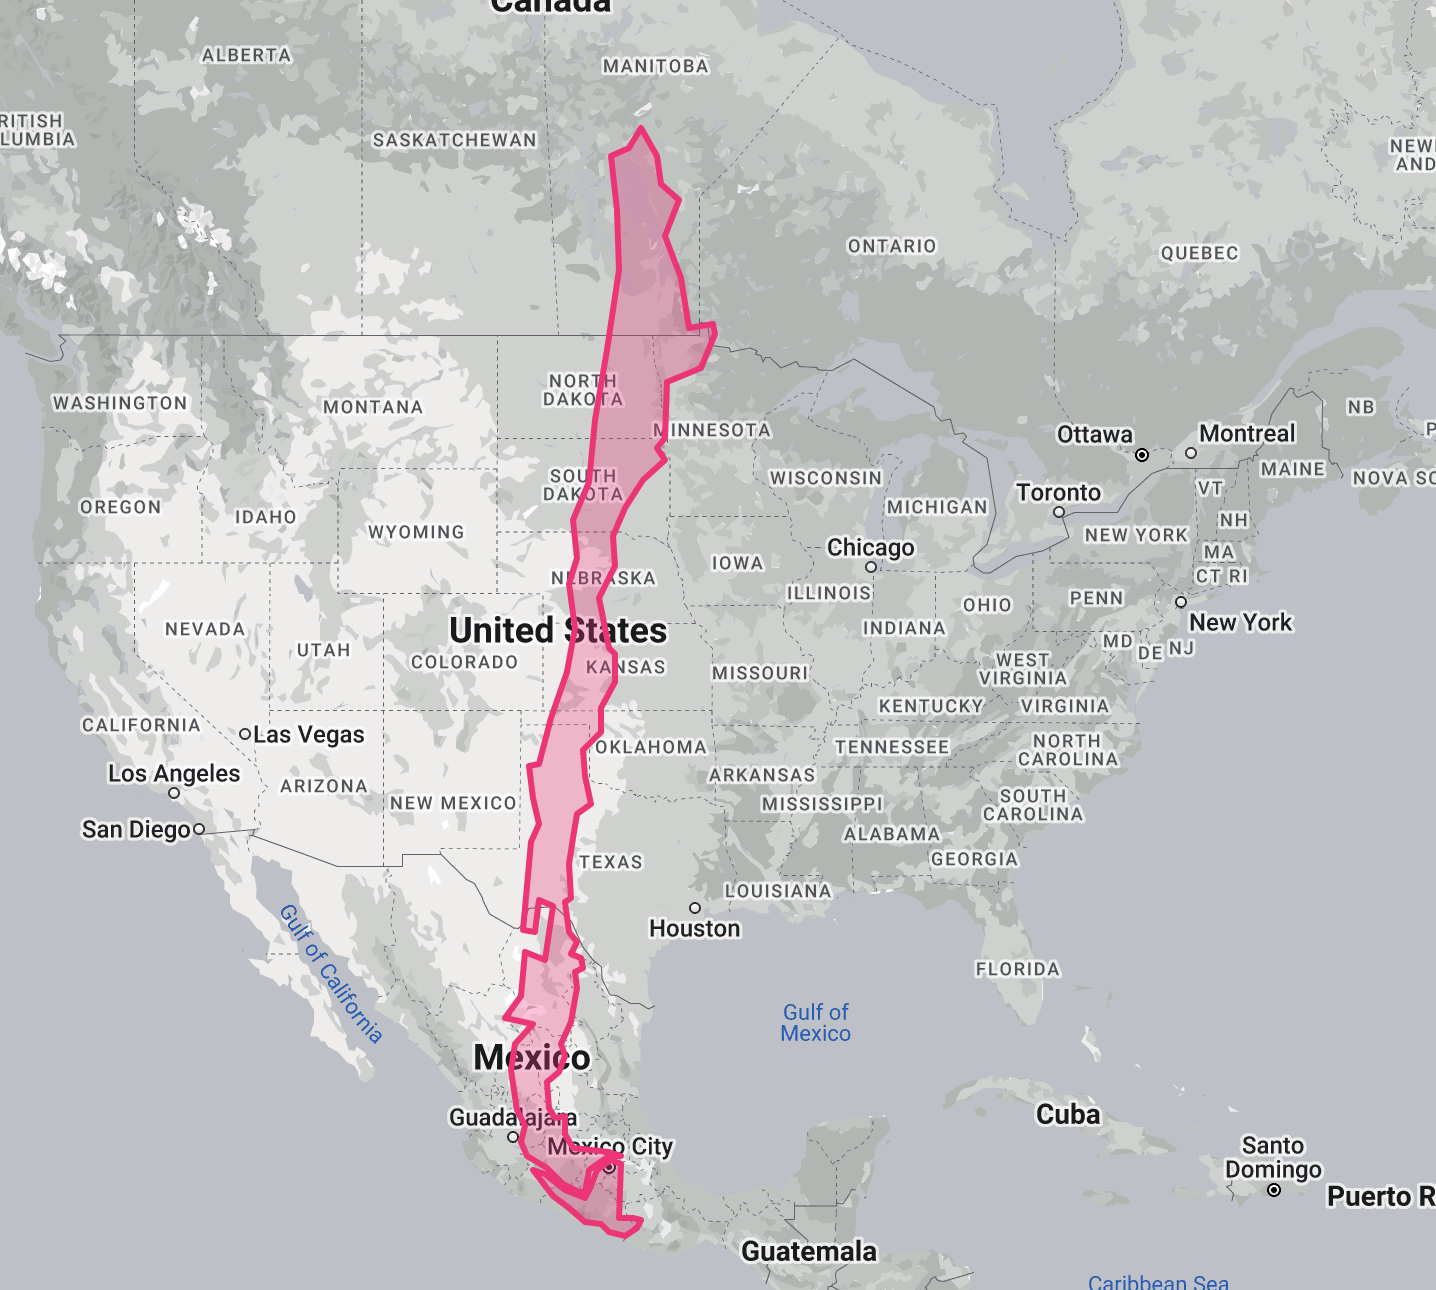 the size of Chile put over a map of North America, stretching from Canada to the bottom of Mexico